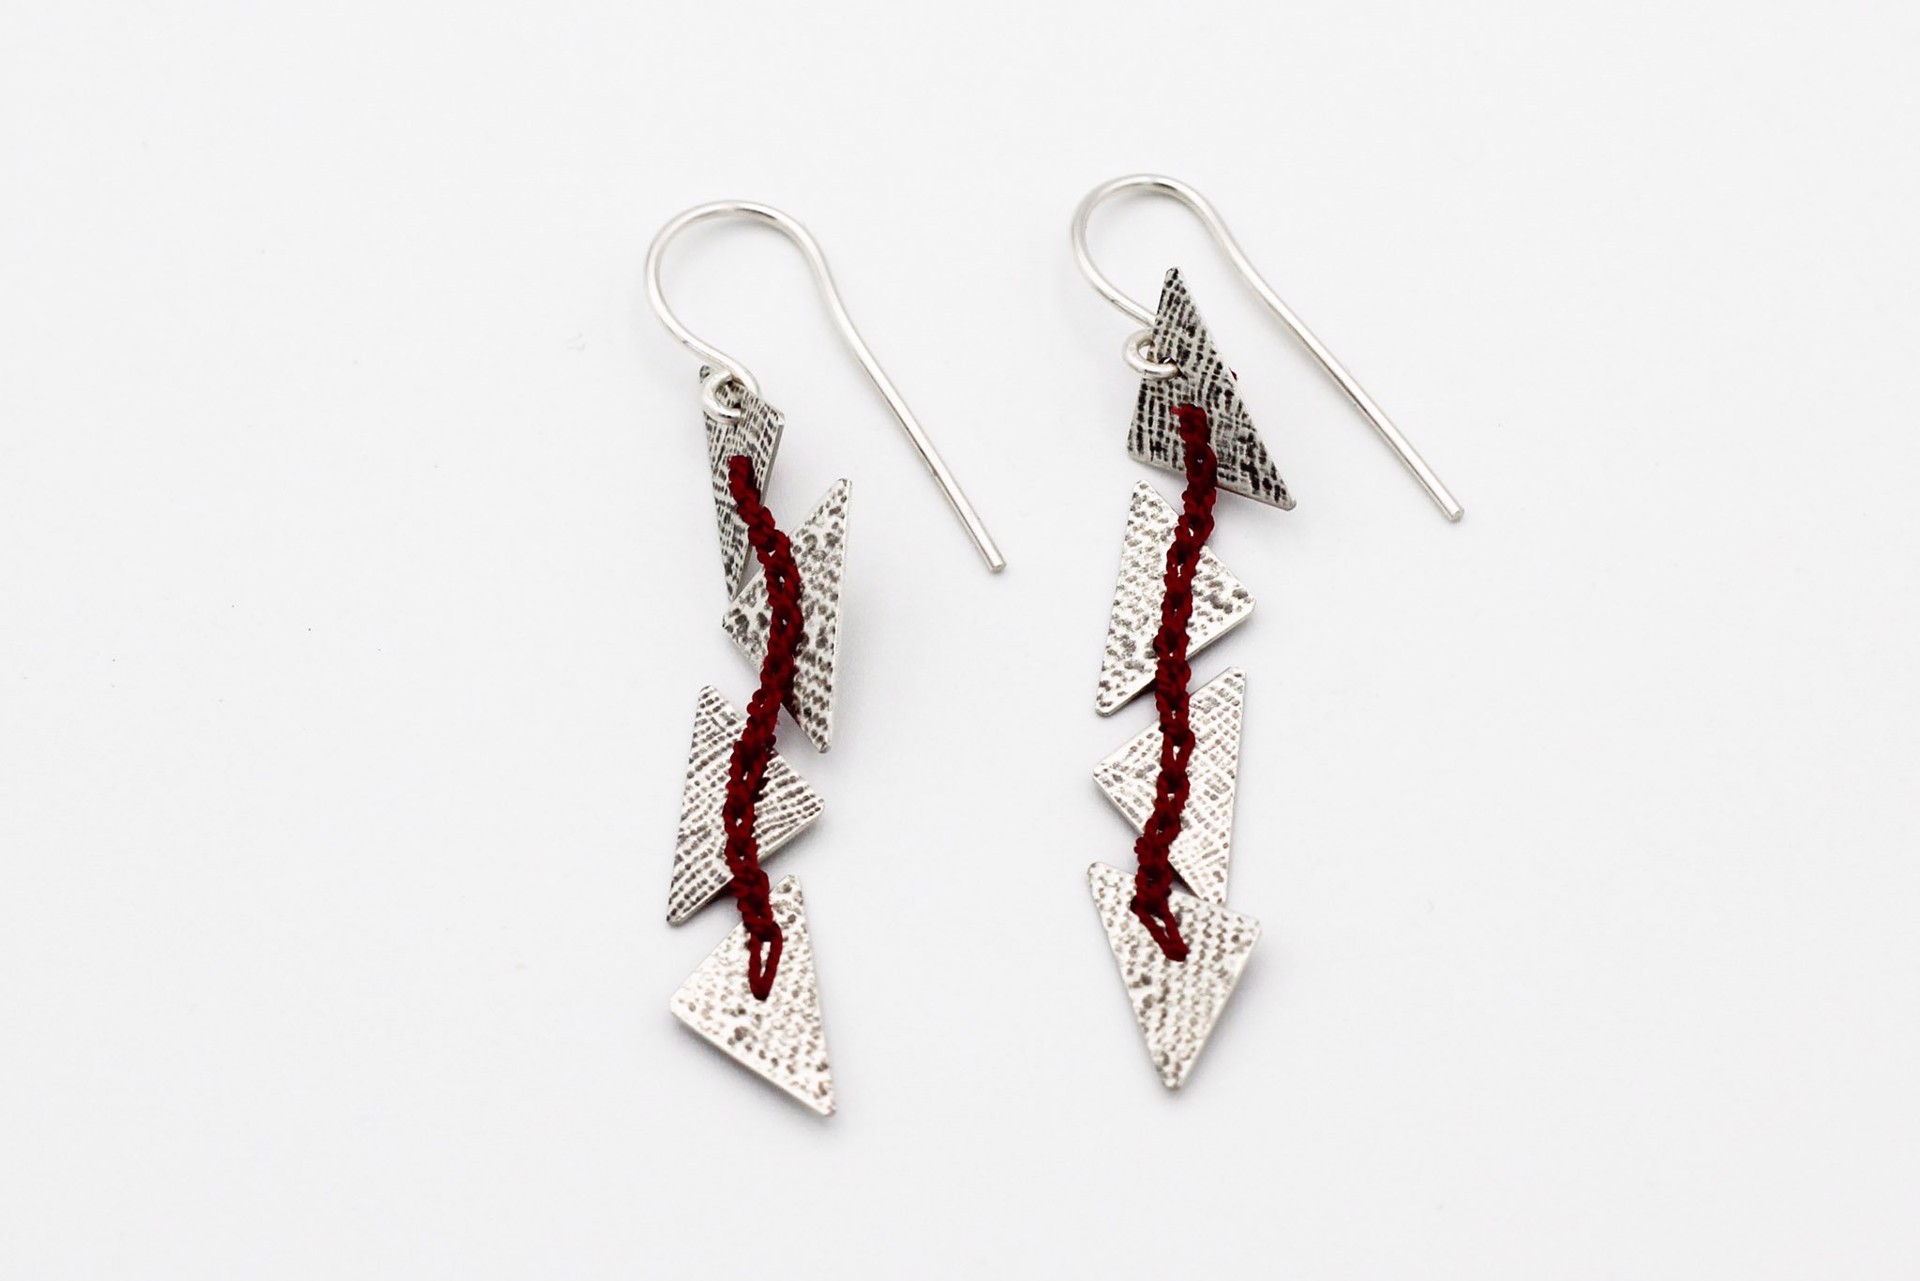 Earrings with Red Silk by Erica Schlueter